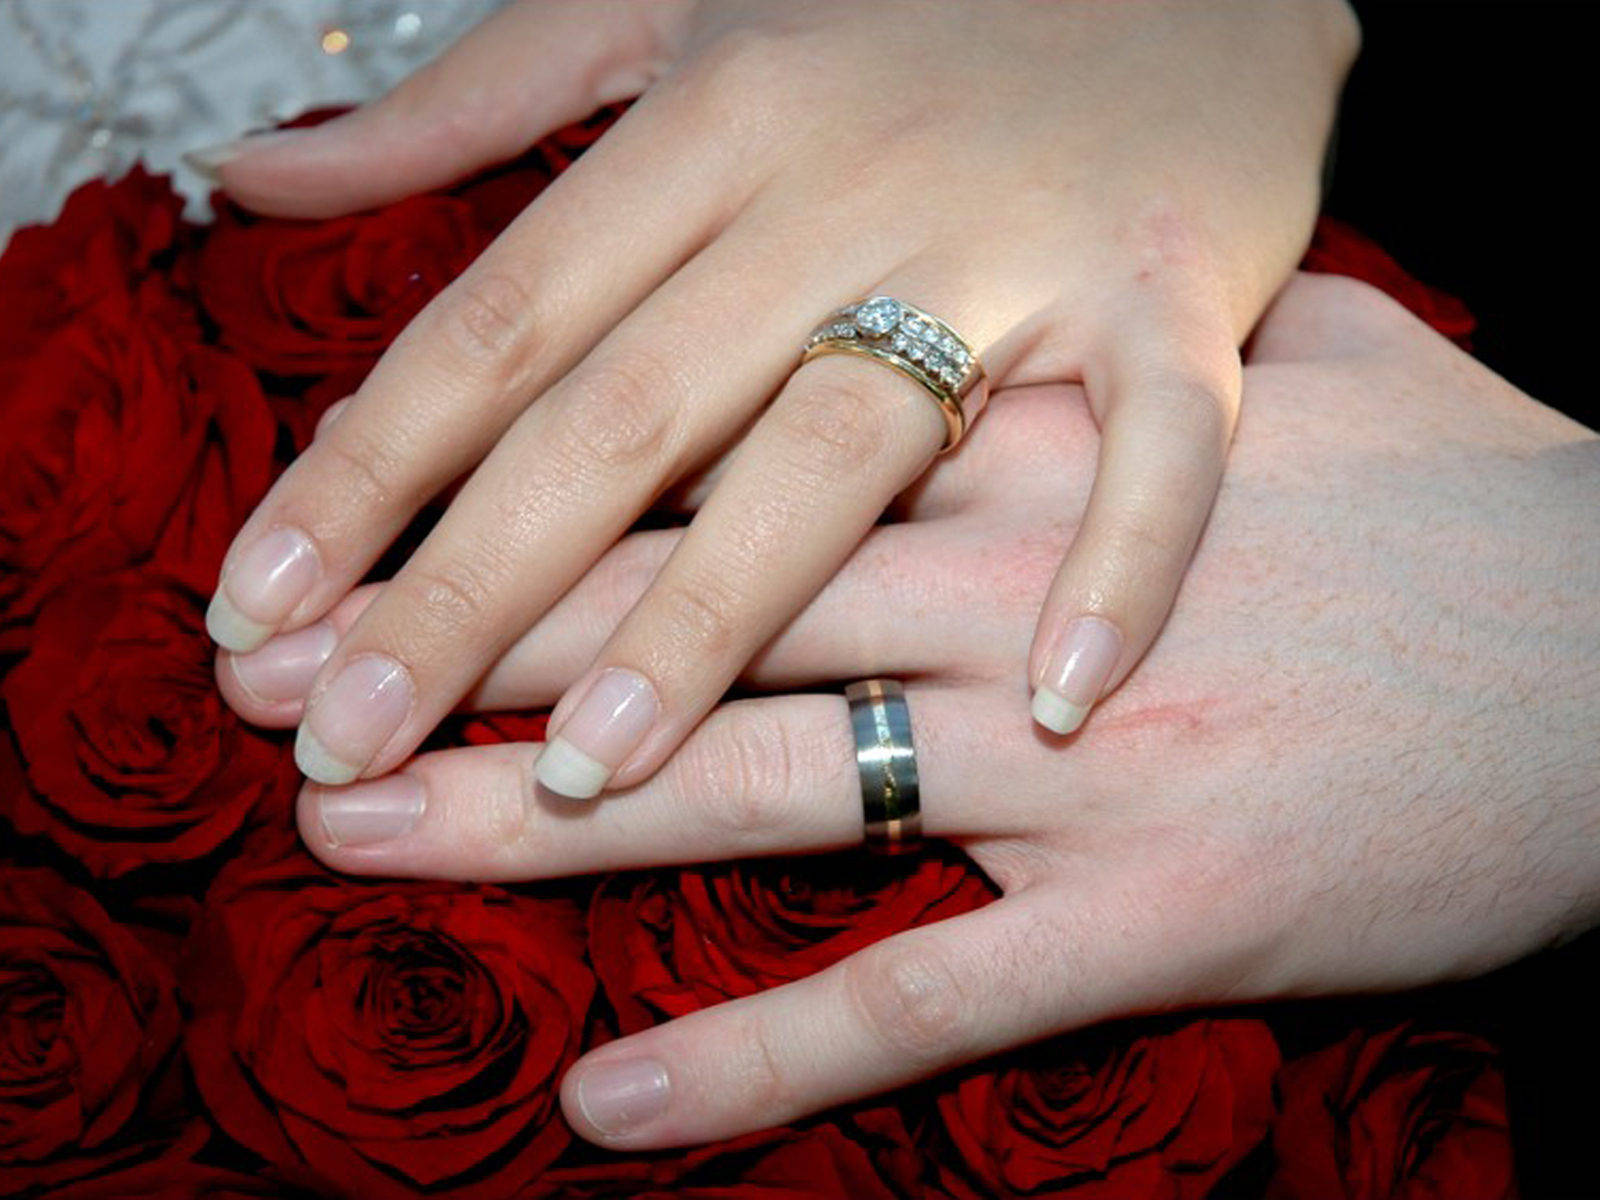 Intimate Holding Hands With Rings On Roses